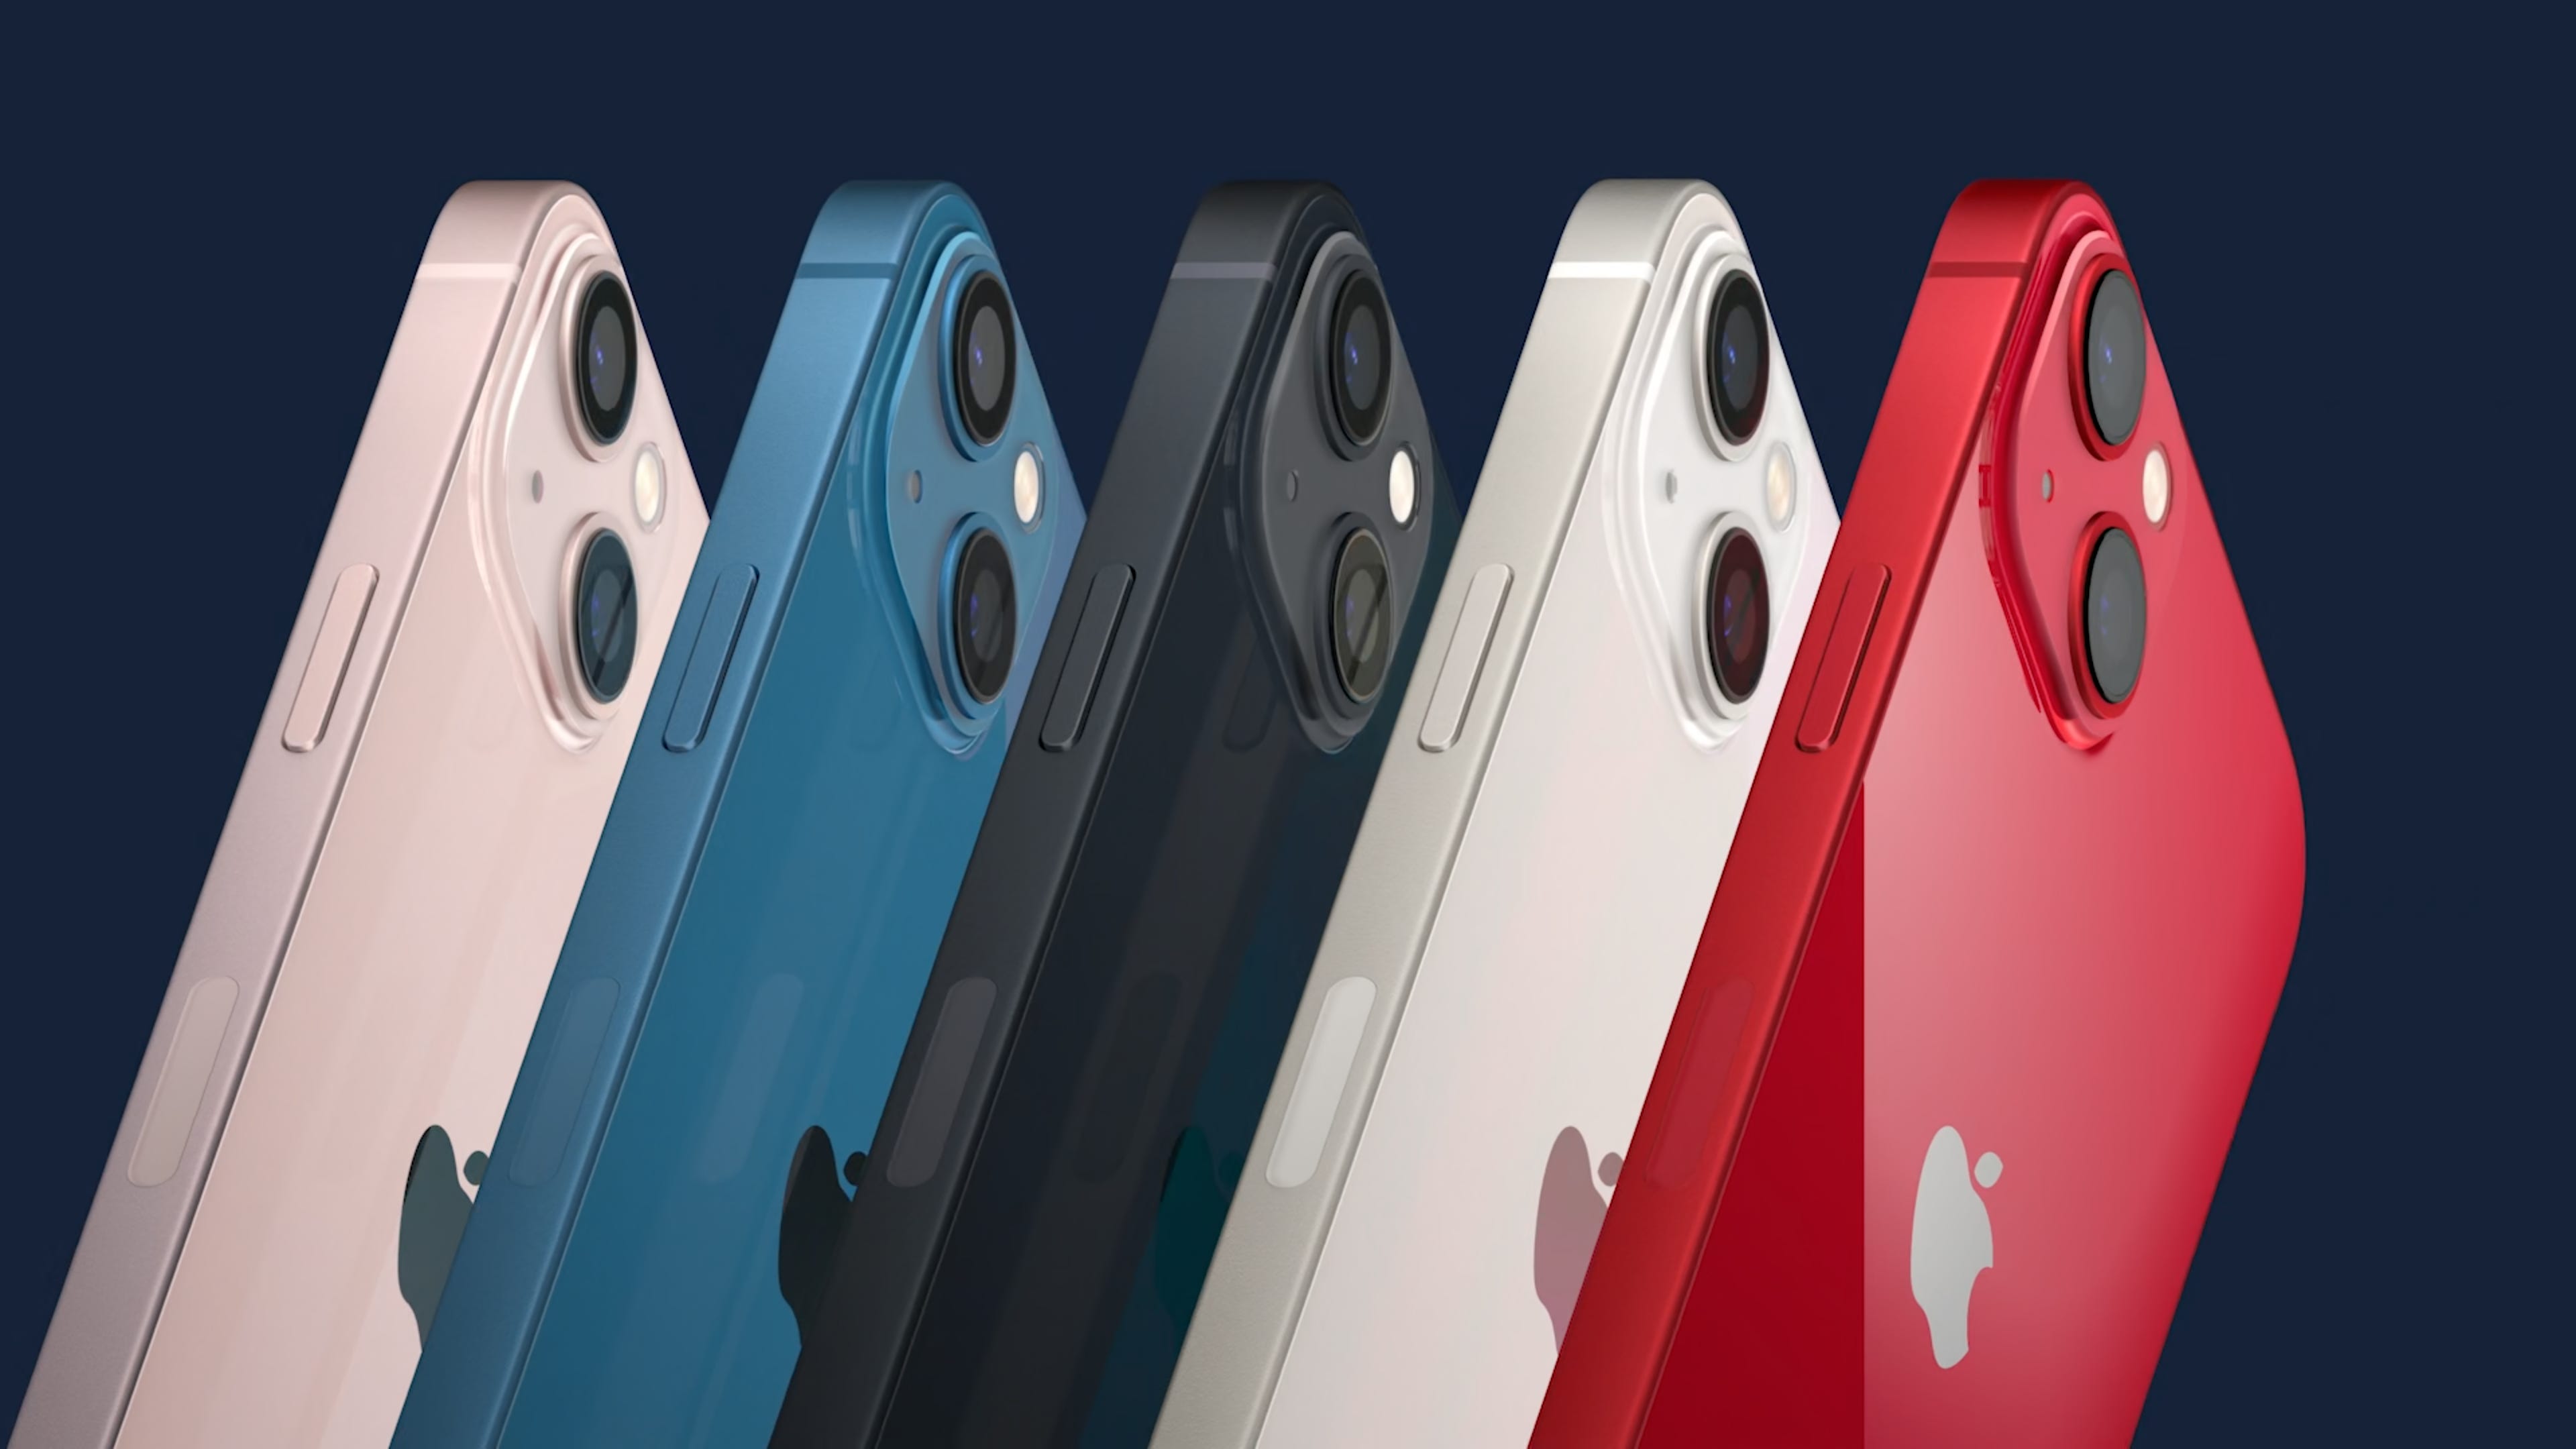 Five iPhones in different colors sit side by side